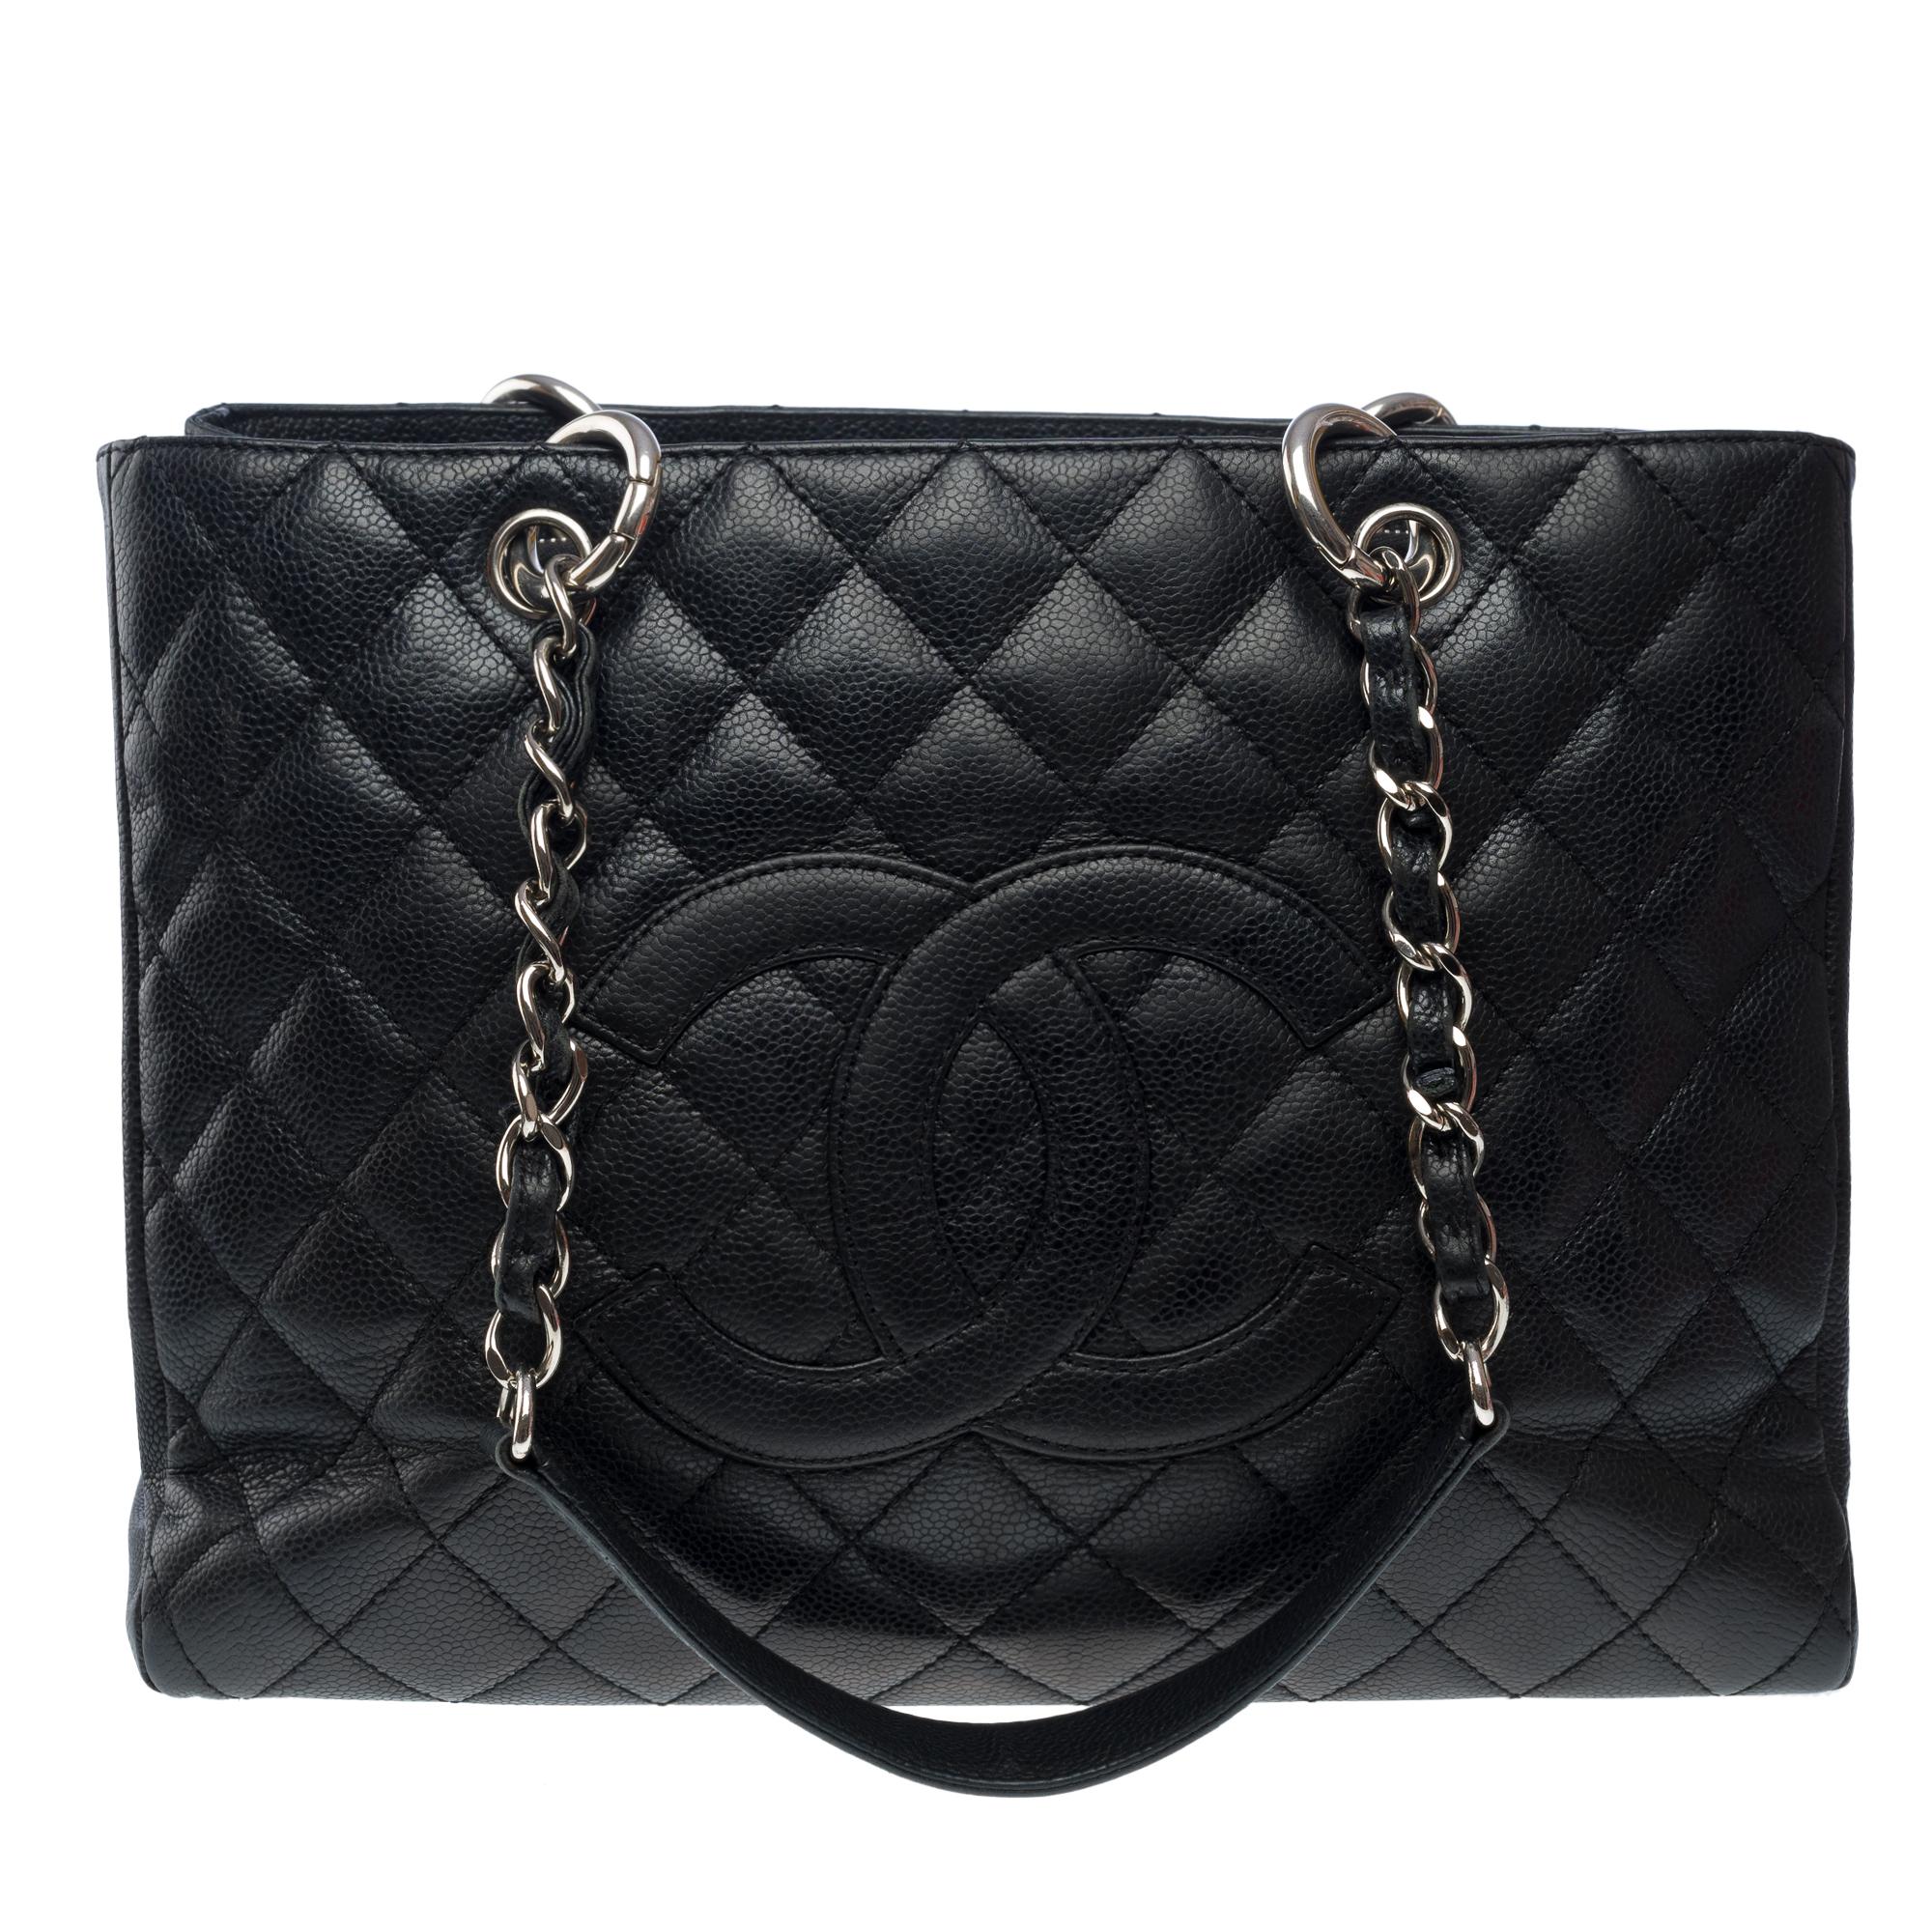 Chanel​ ​Shopping​ ​GST​ ​(Grand​ ​Shopping​ ​Tote)​ ​Tote​ ​bag​ ​in​ ​black​ ​caviar​ ​leather,​ ​silver​ ​metal​ ​trim,​ ​double​ ​silver​ ​metal​ ​handle​ ​interlaced​ ​with​ ​black​ ​leather​ ​for​ ​hand​ ​or​ ​shoulder​ ​carry

Pocket​ ​on​